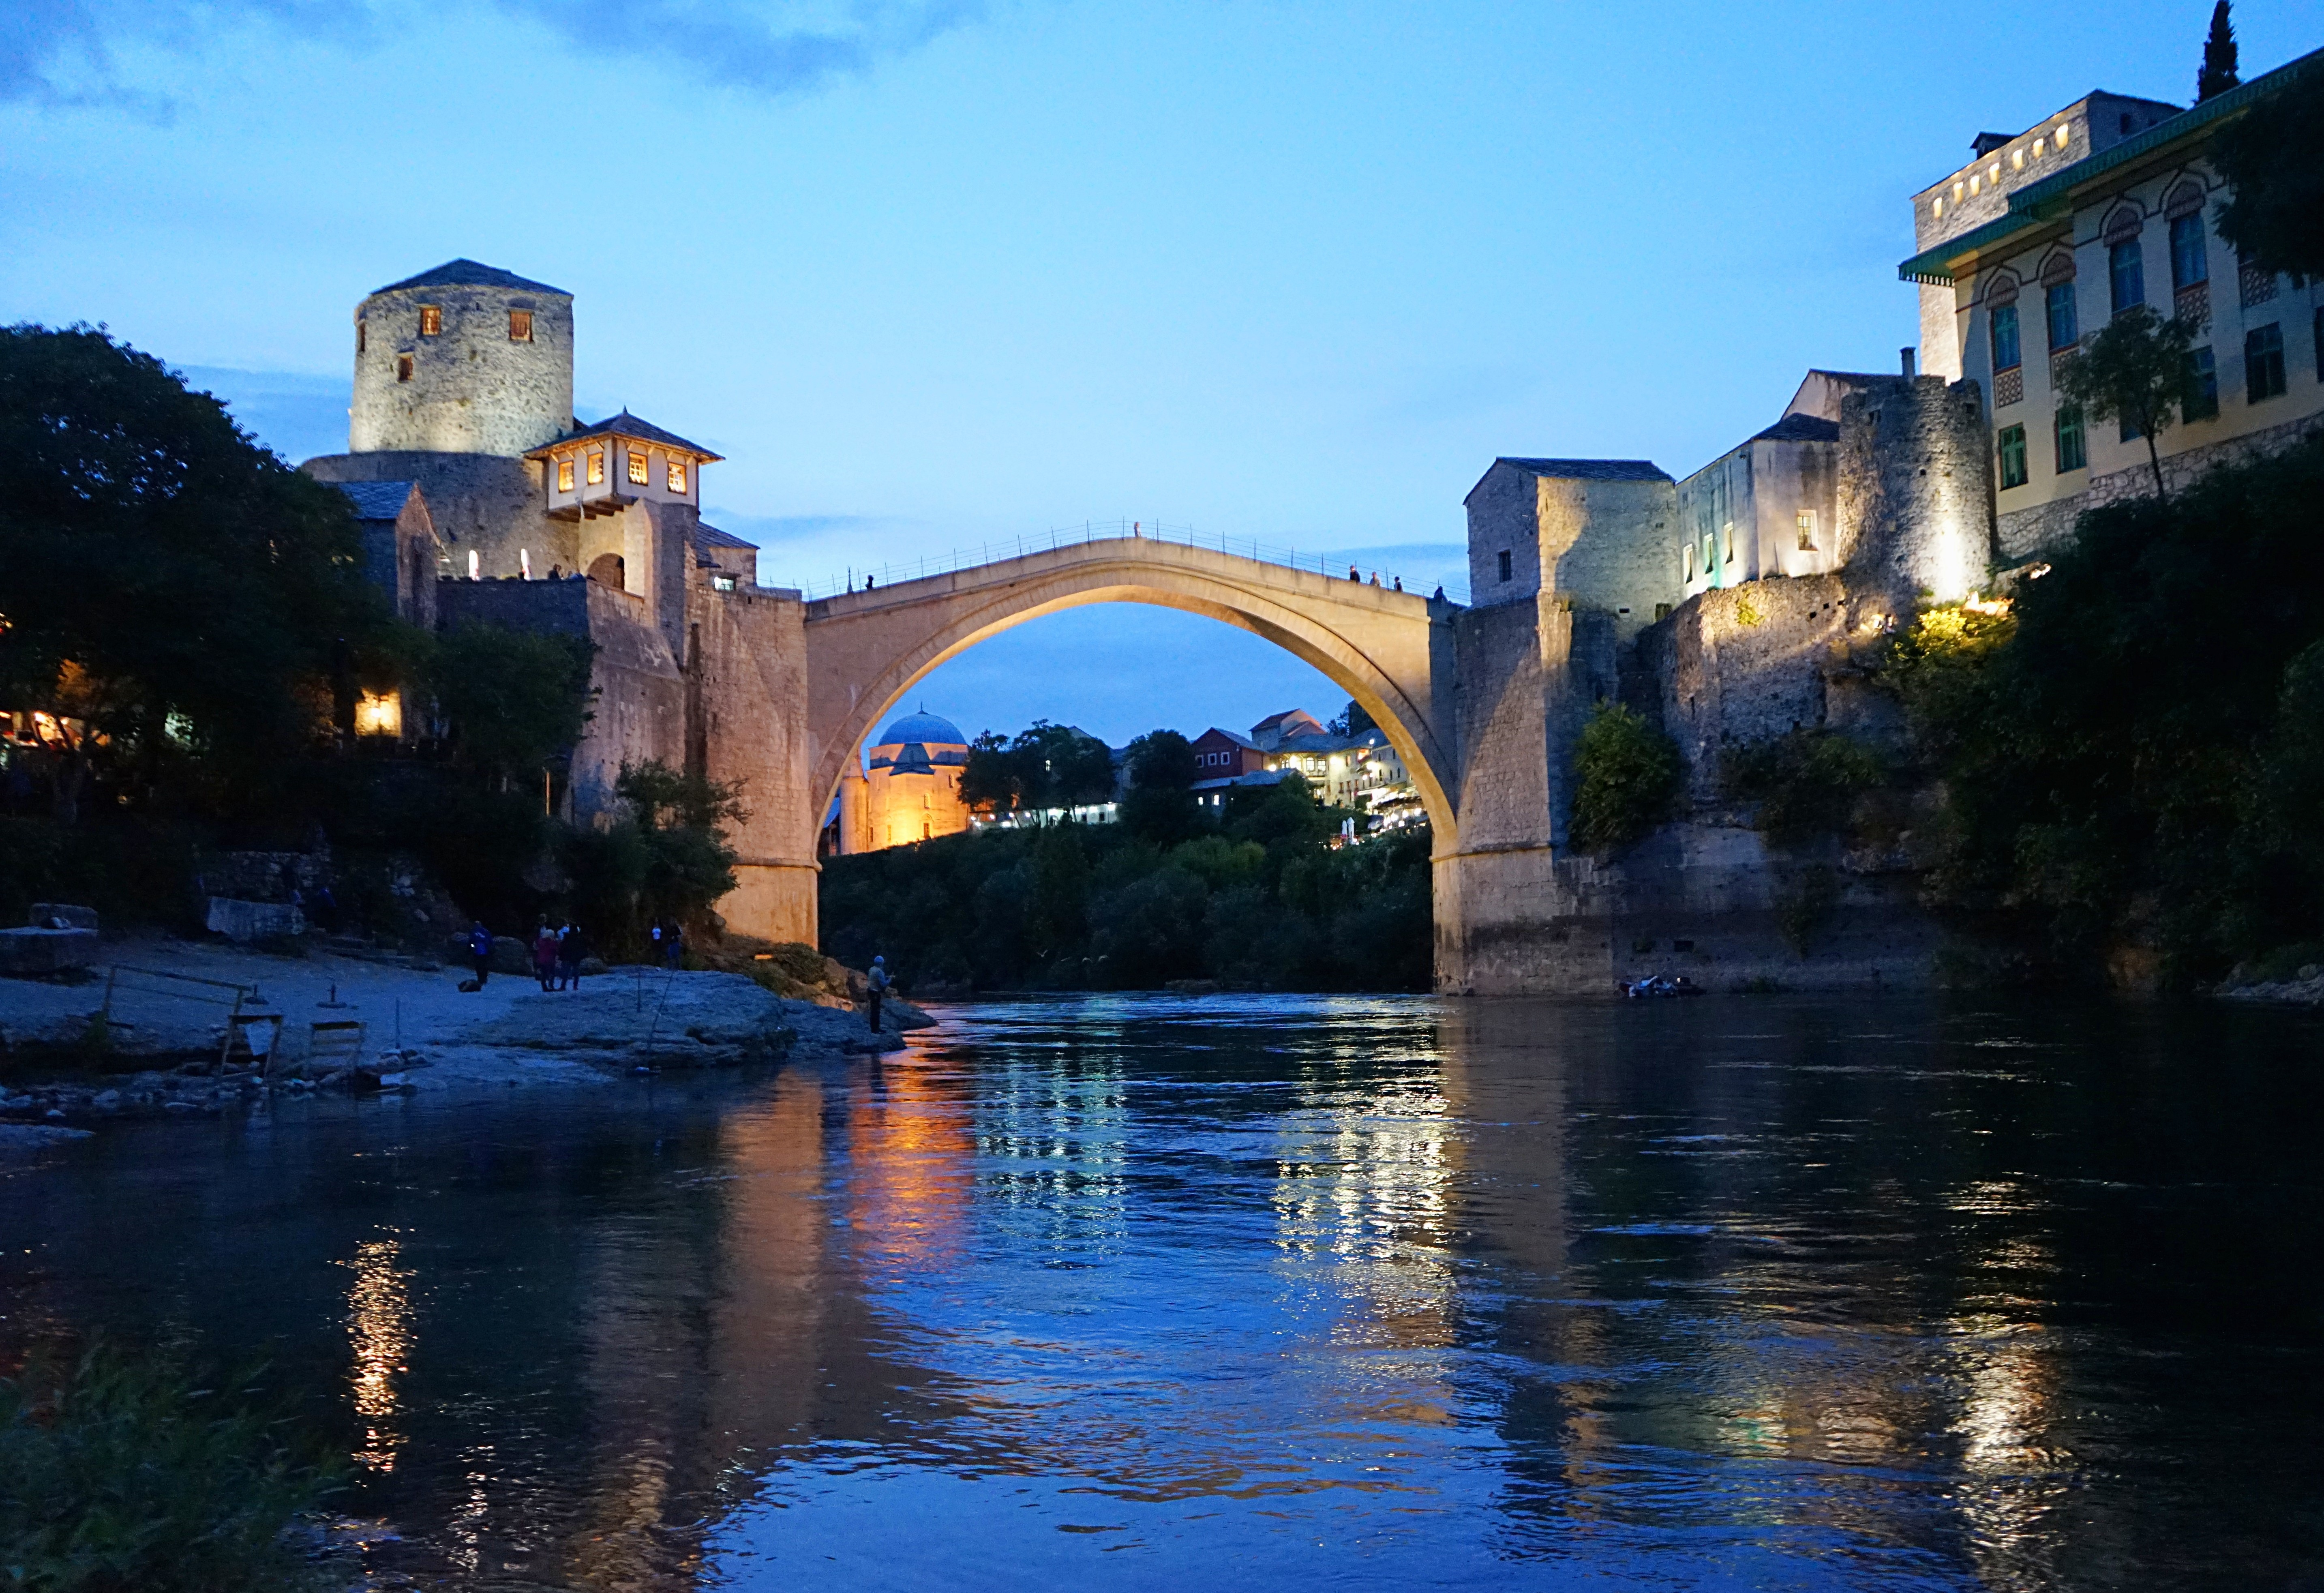 The view of the Old Bridge in Mostar at night